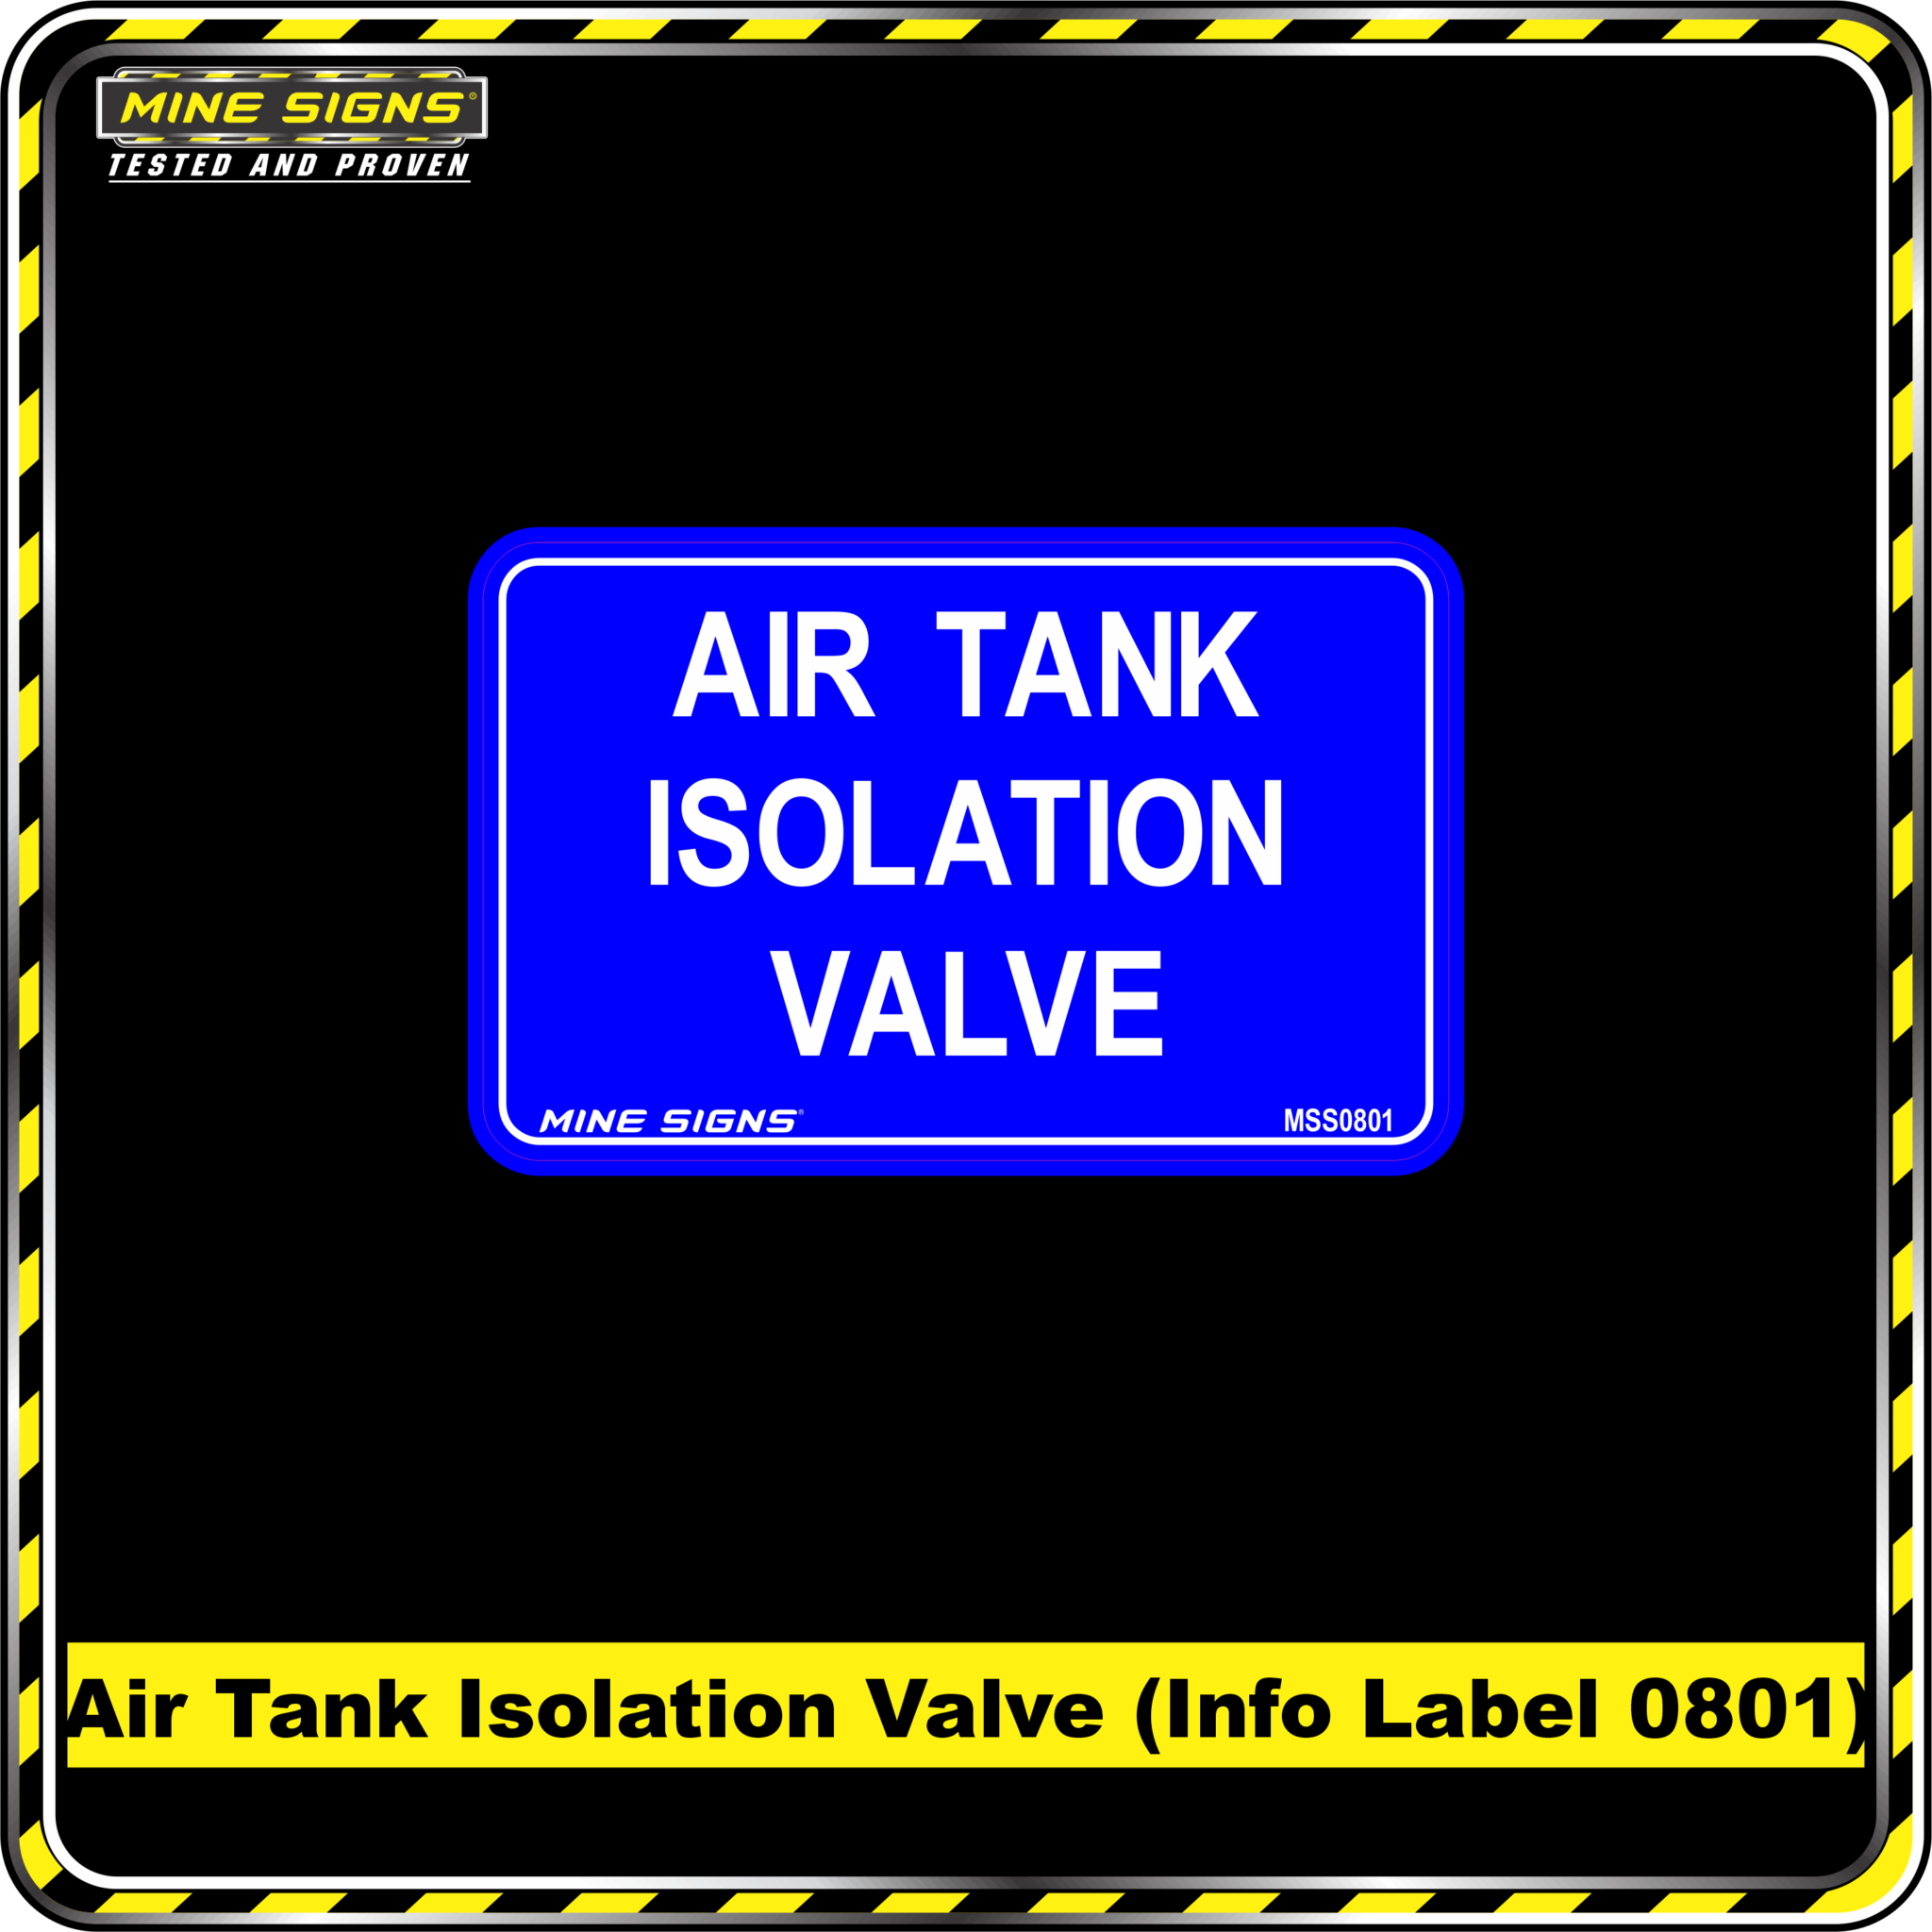 MS - Product Background - Safety Signs - Air Tank Isolation Valve 0801